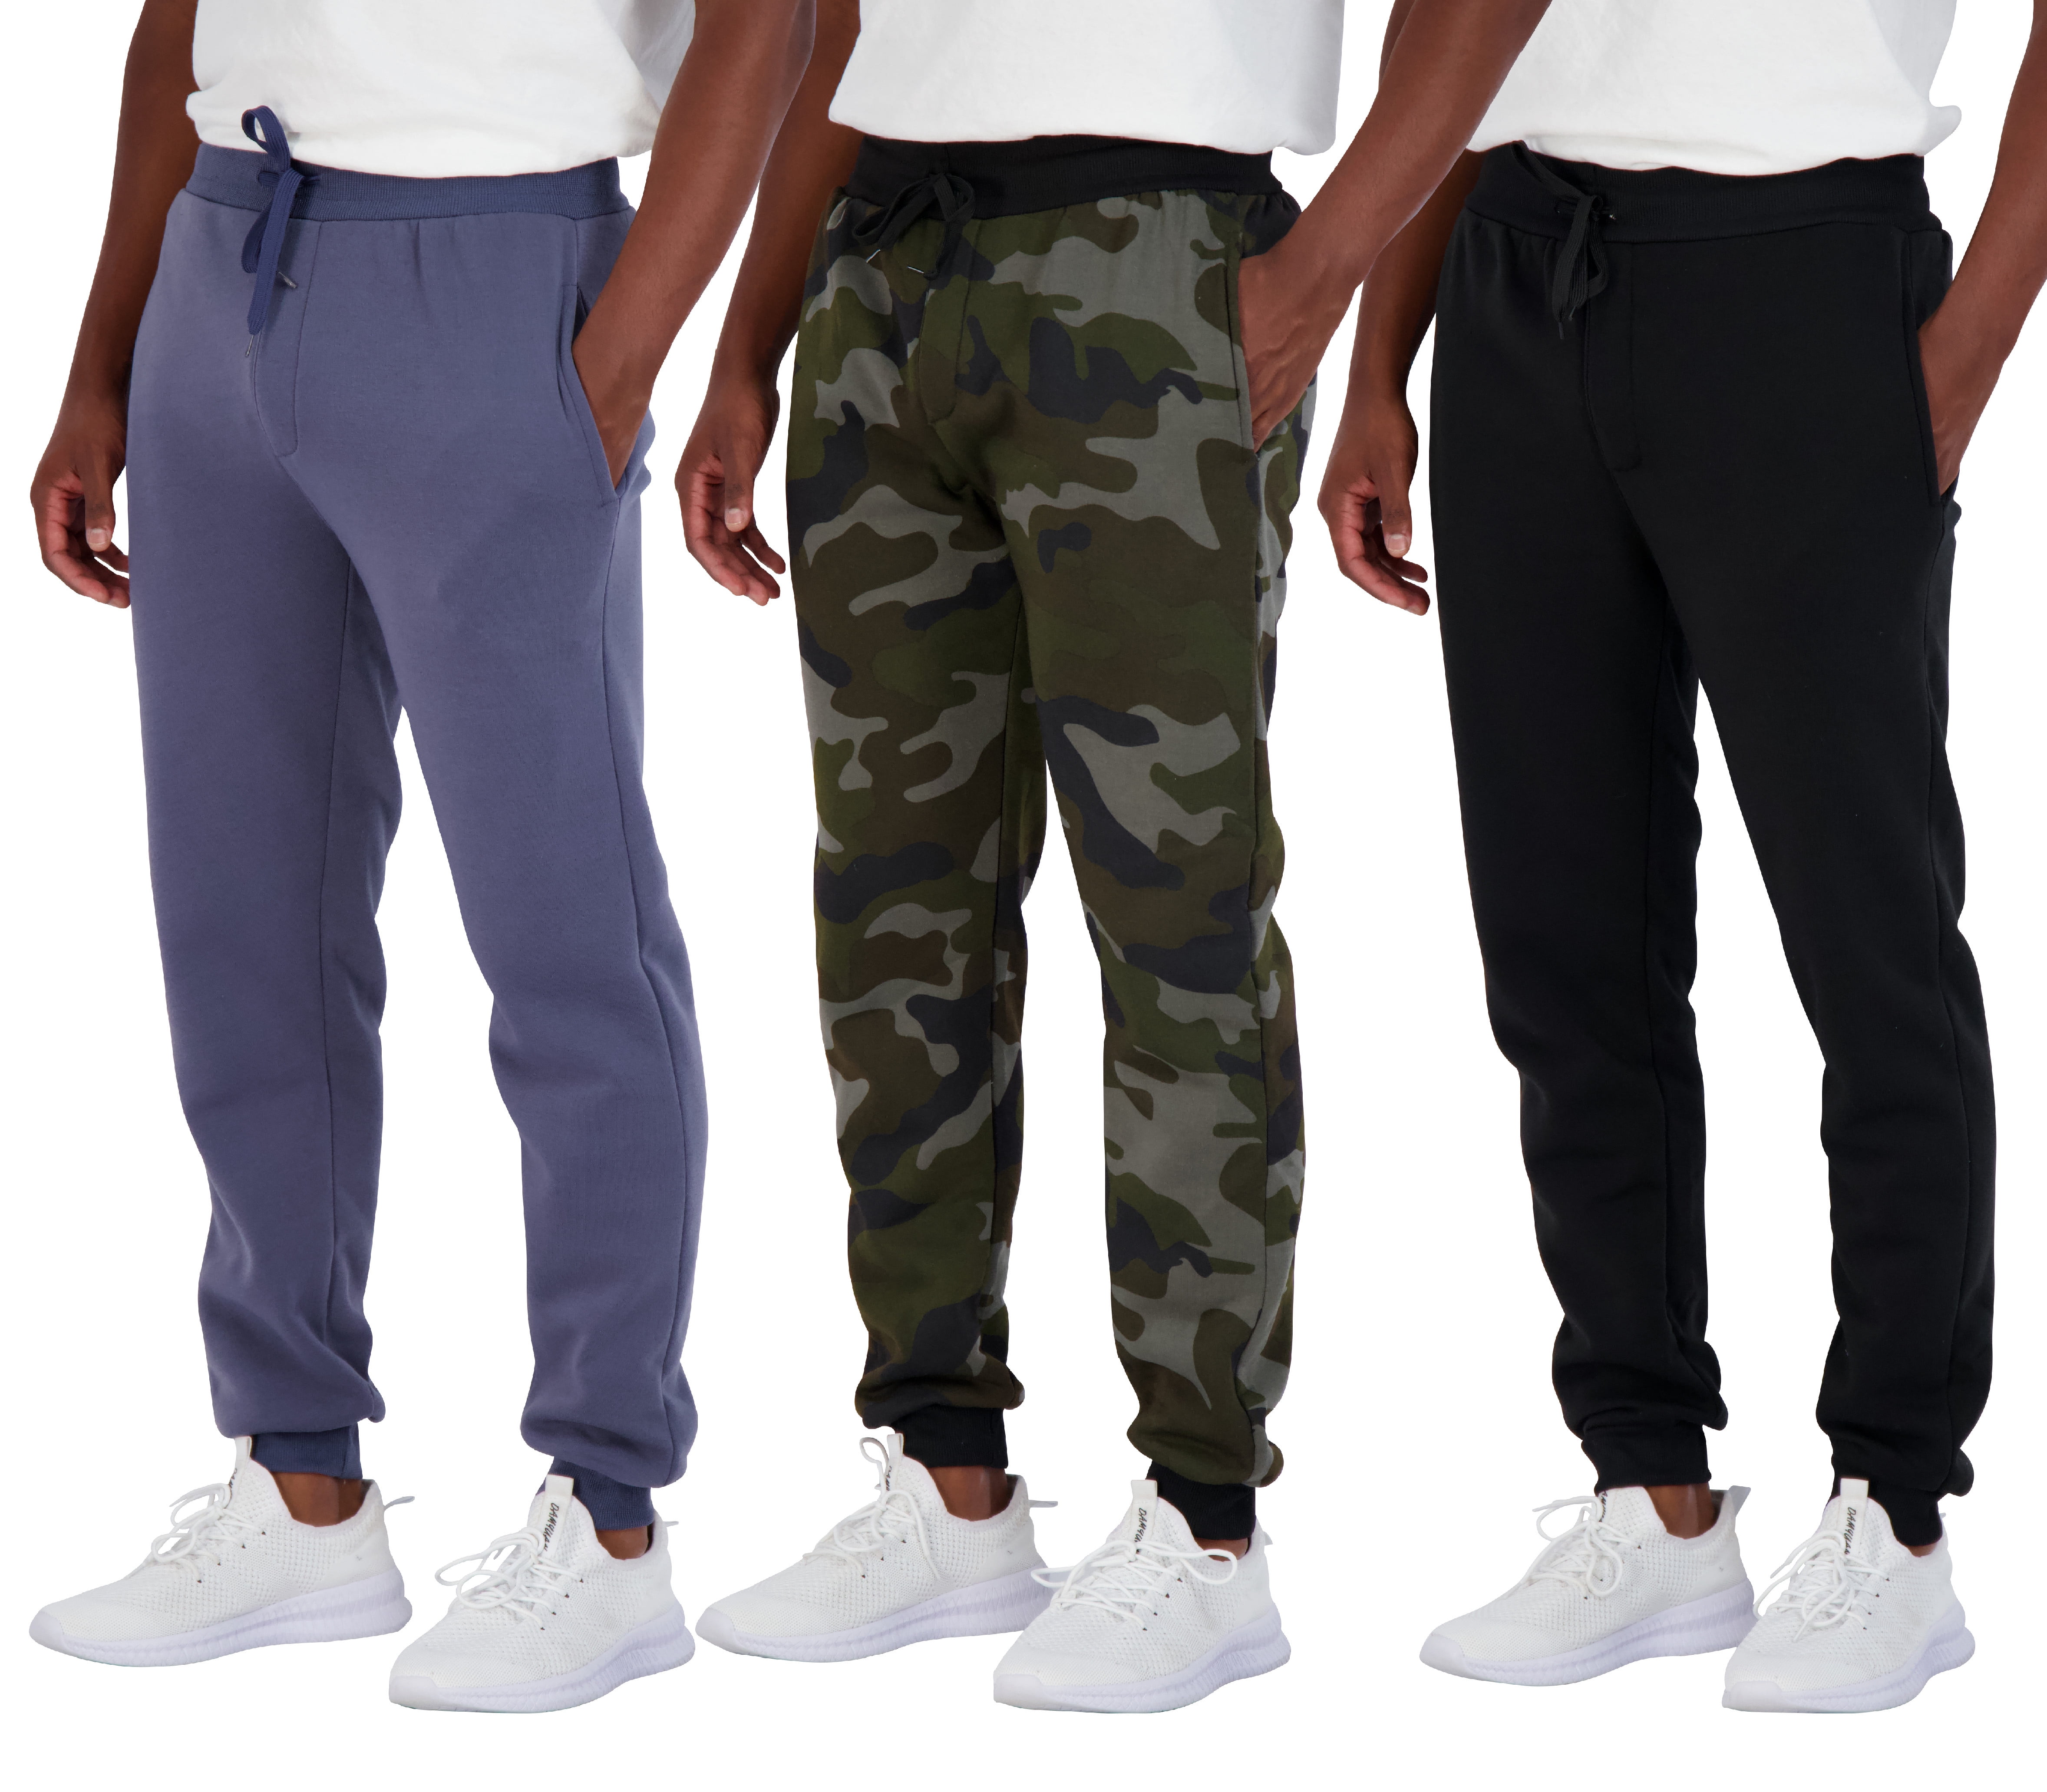 Real Essentials 3 Pack: Men's Tech Fleece Active Athletic Casual Jogger  Sweatpants with Pockets(Available In Big & Tall)